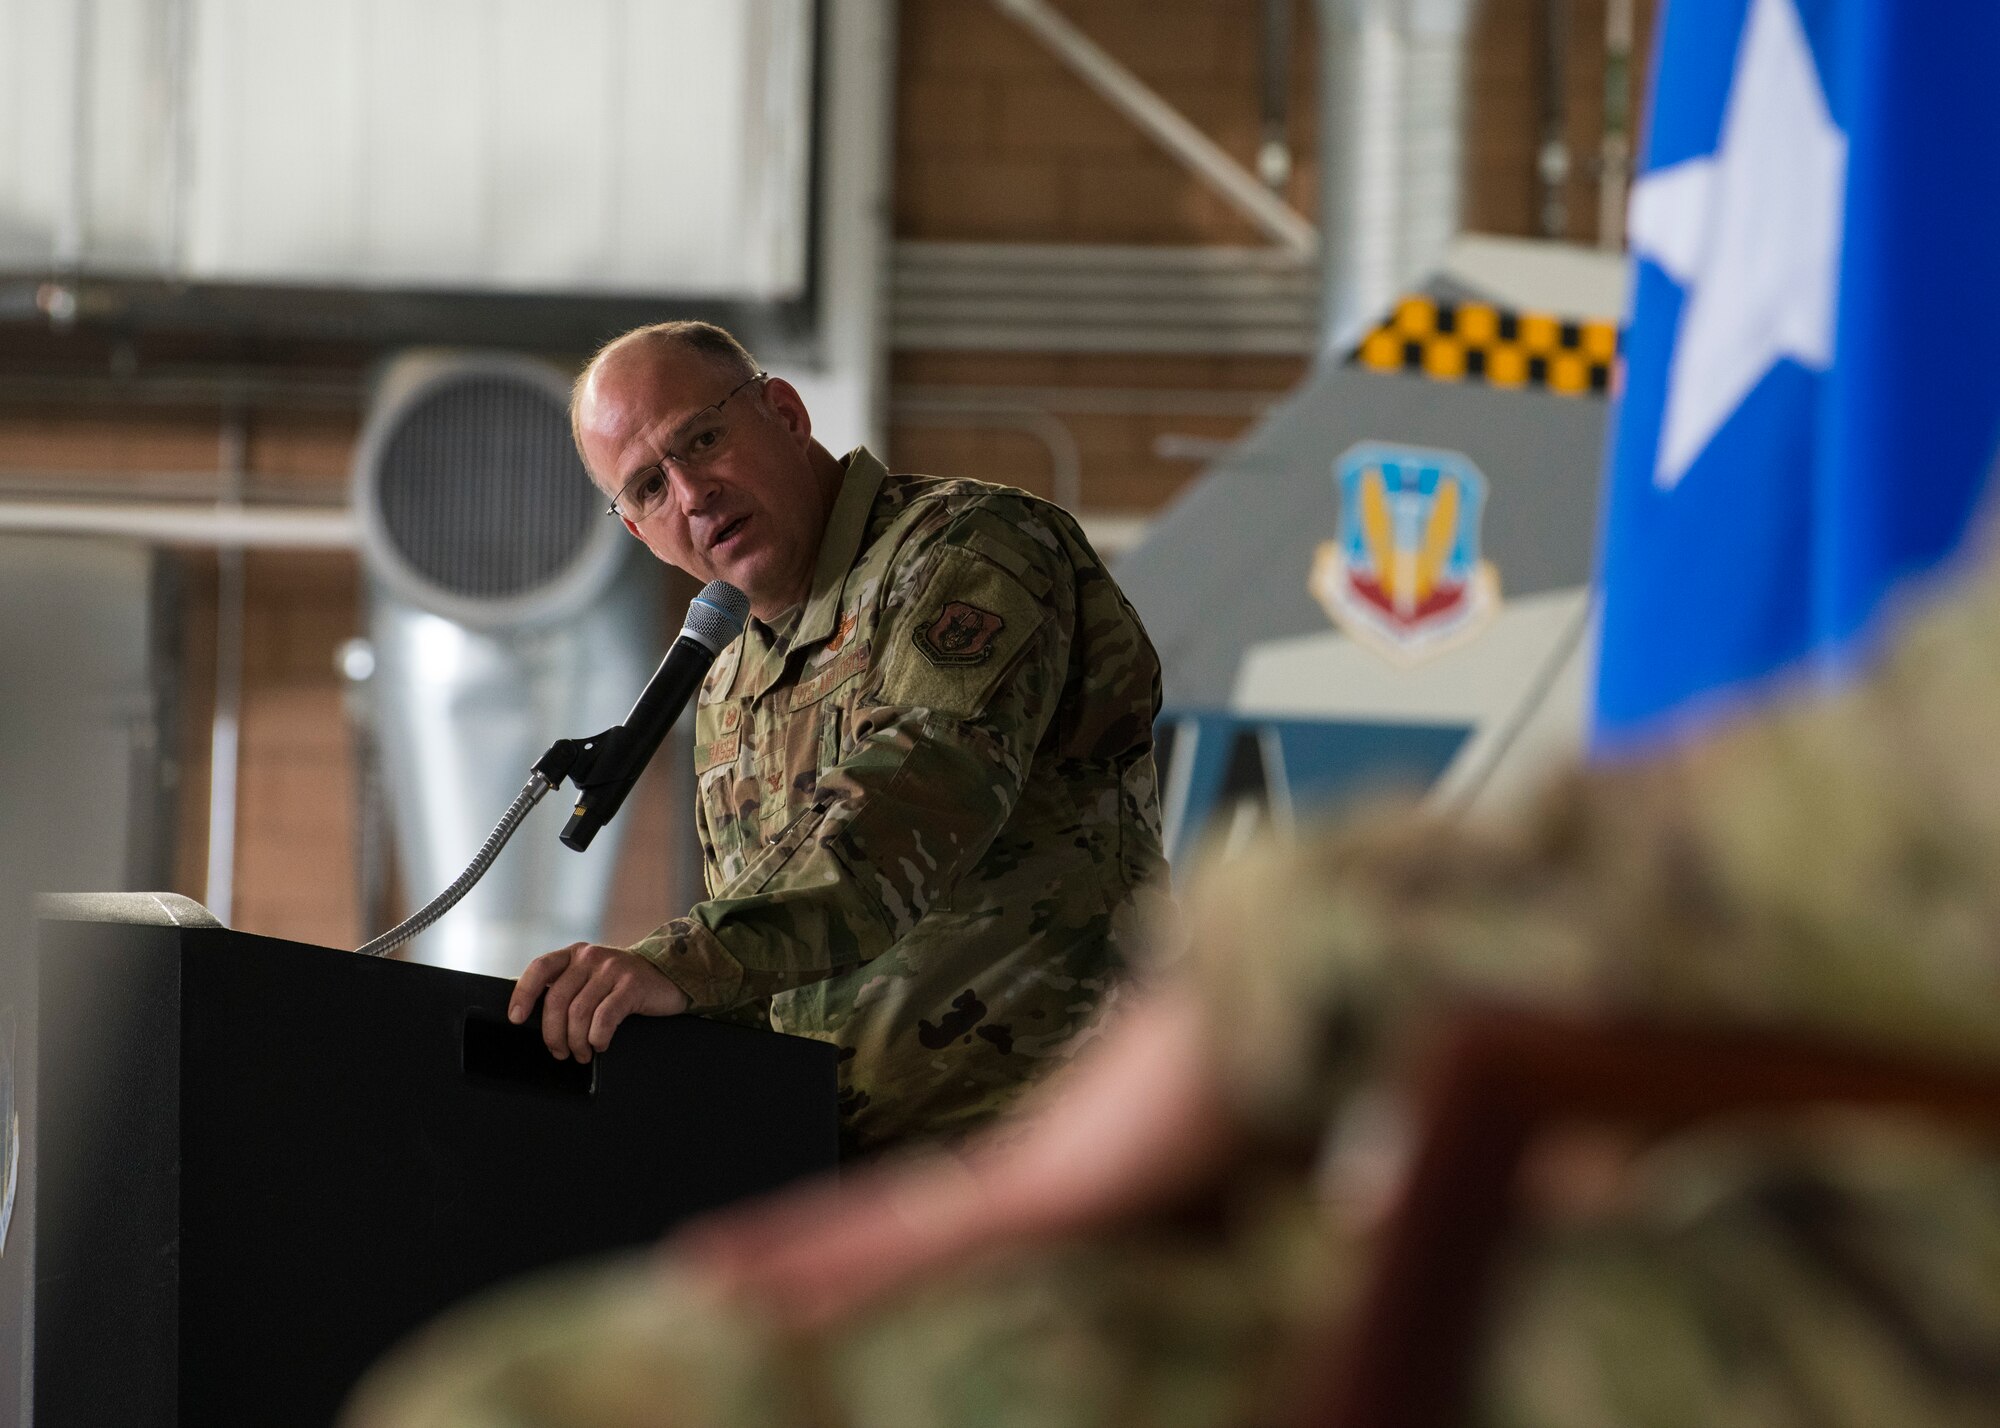 Col. Sean Rassas, 926th Wing commander, shares remarks during the 926th Wing change of command ceremony, June 13, 2021 at Nellis Air Force Base, Nevada. The 926th Wing is comprised of over 1,500 unit reservists who are classically associated in Total Force Integration throughout Air Combat Command. (U.S. Air Force photo by Senior Airman Brett Clashman)